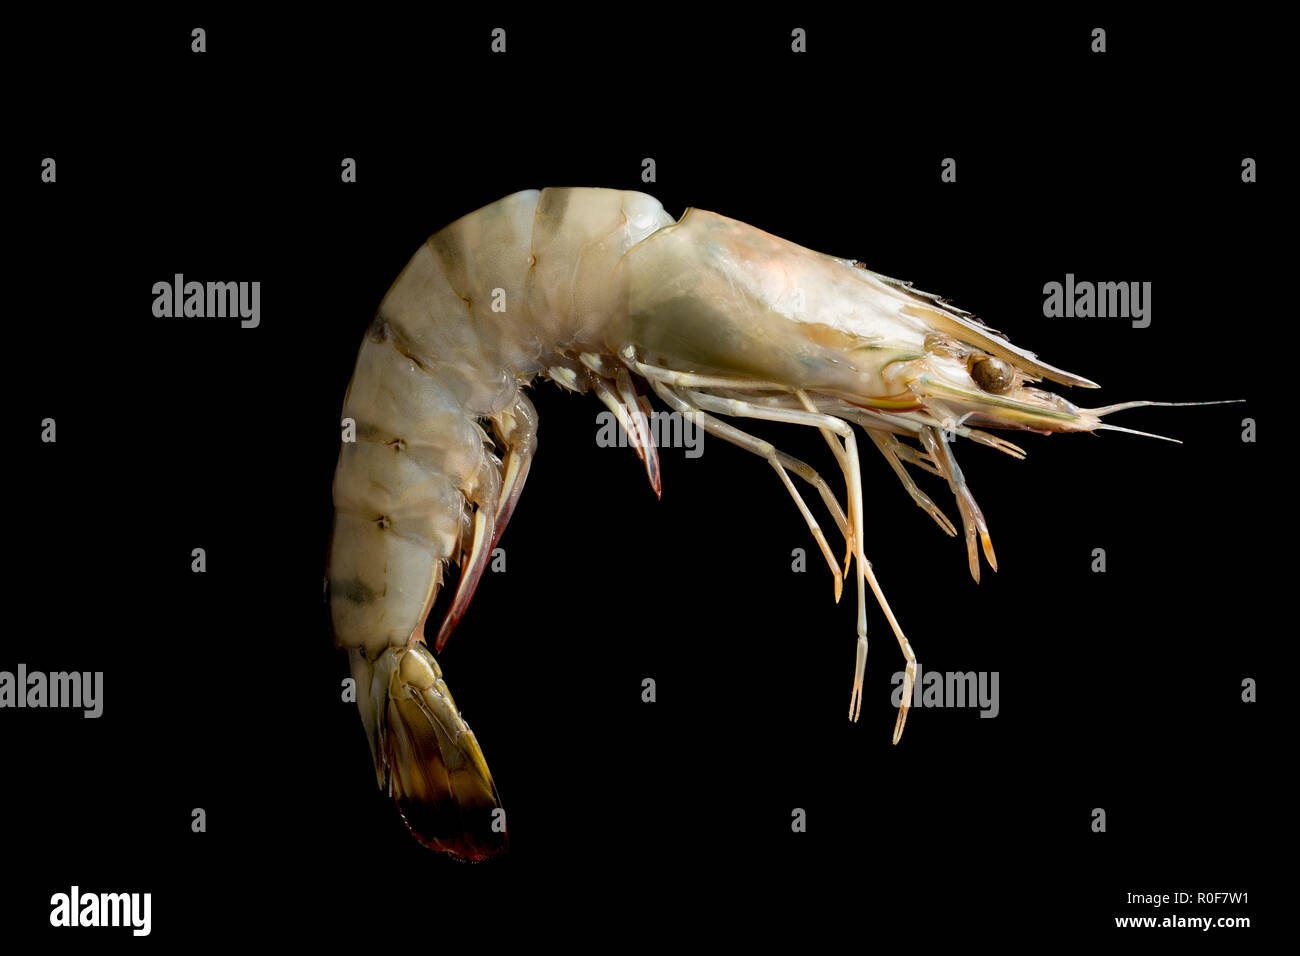 A single farmed raw tiger prawn imported to the UK from Madagascar and bought from a supermarket. Photographed on a black background. England UK GB Stock Photo